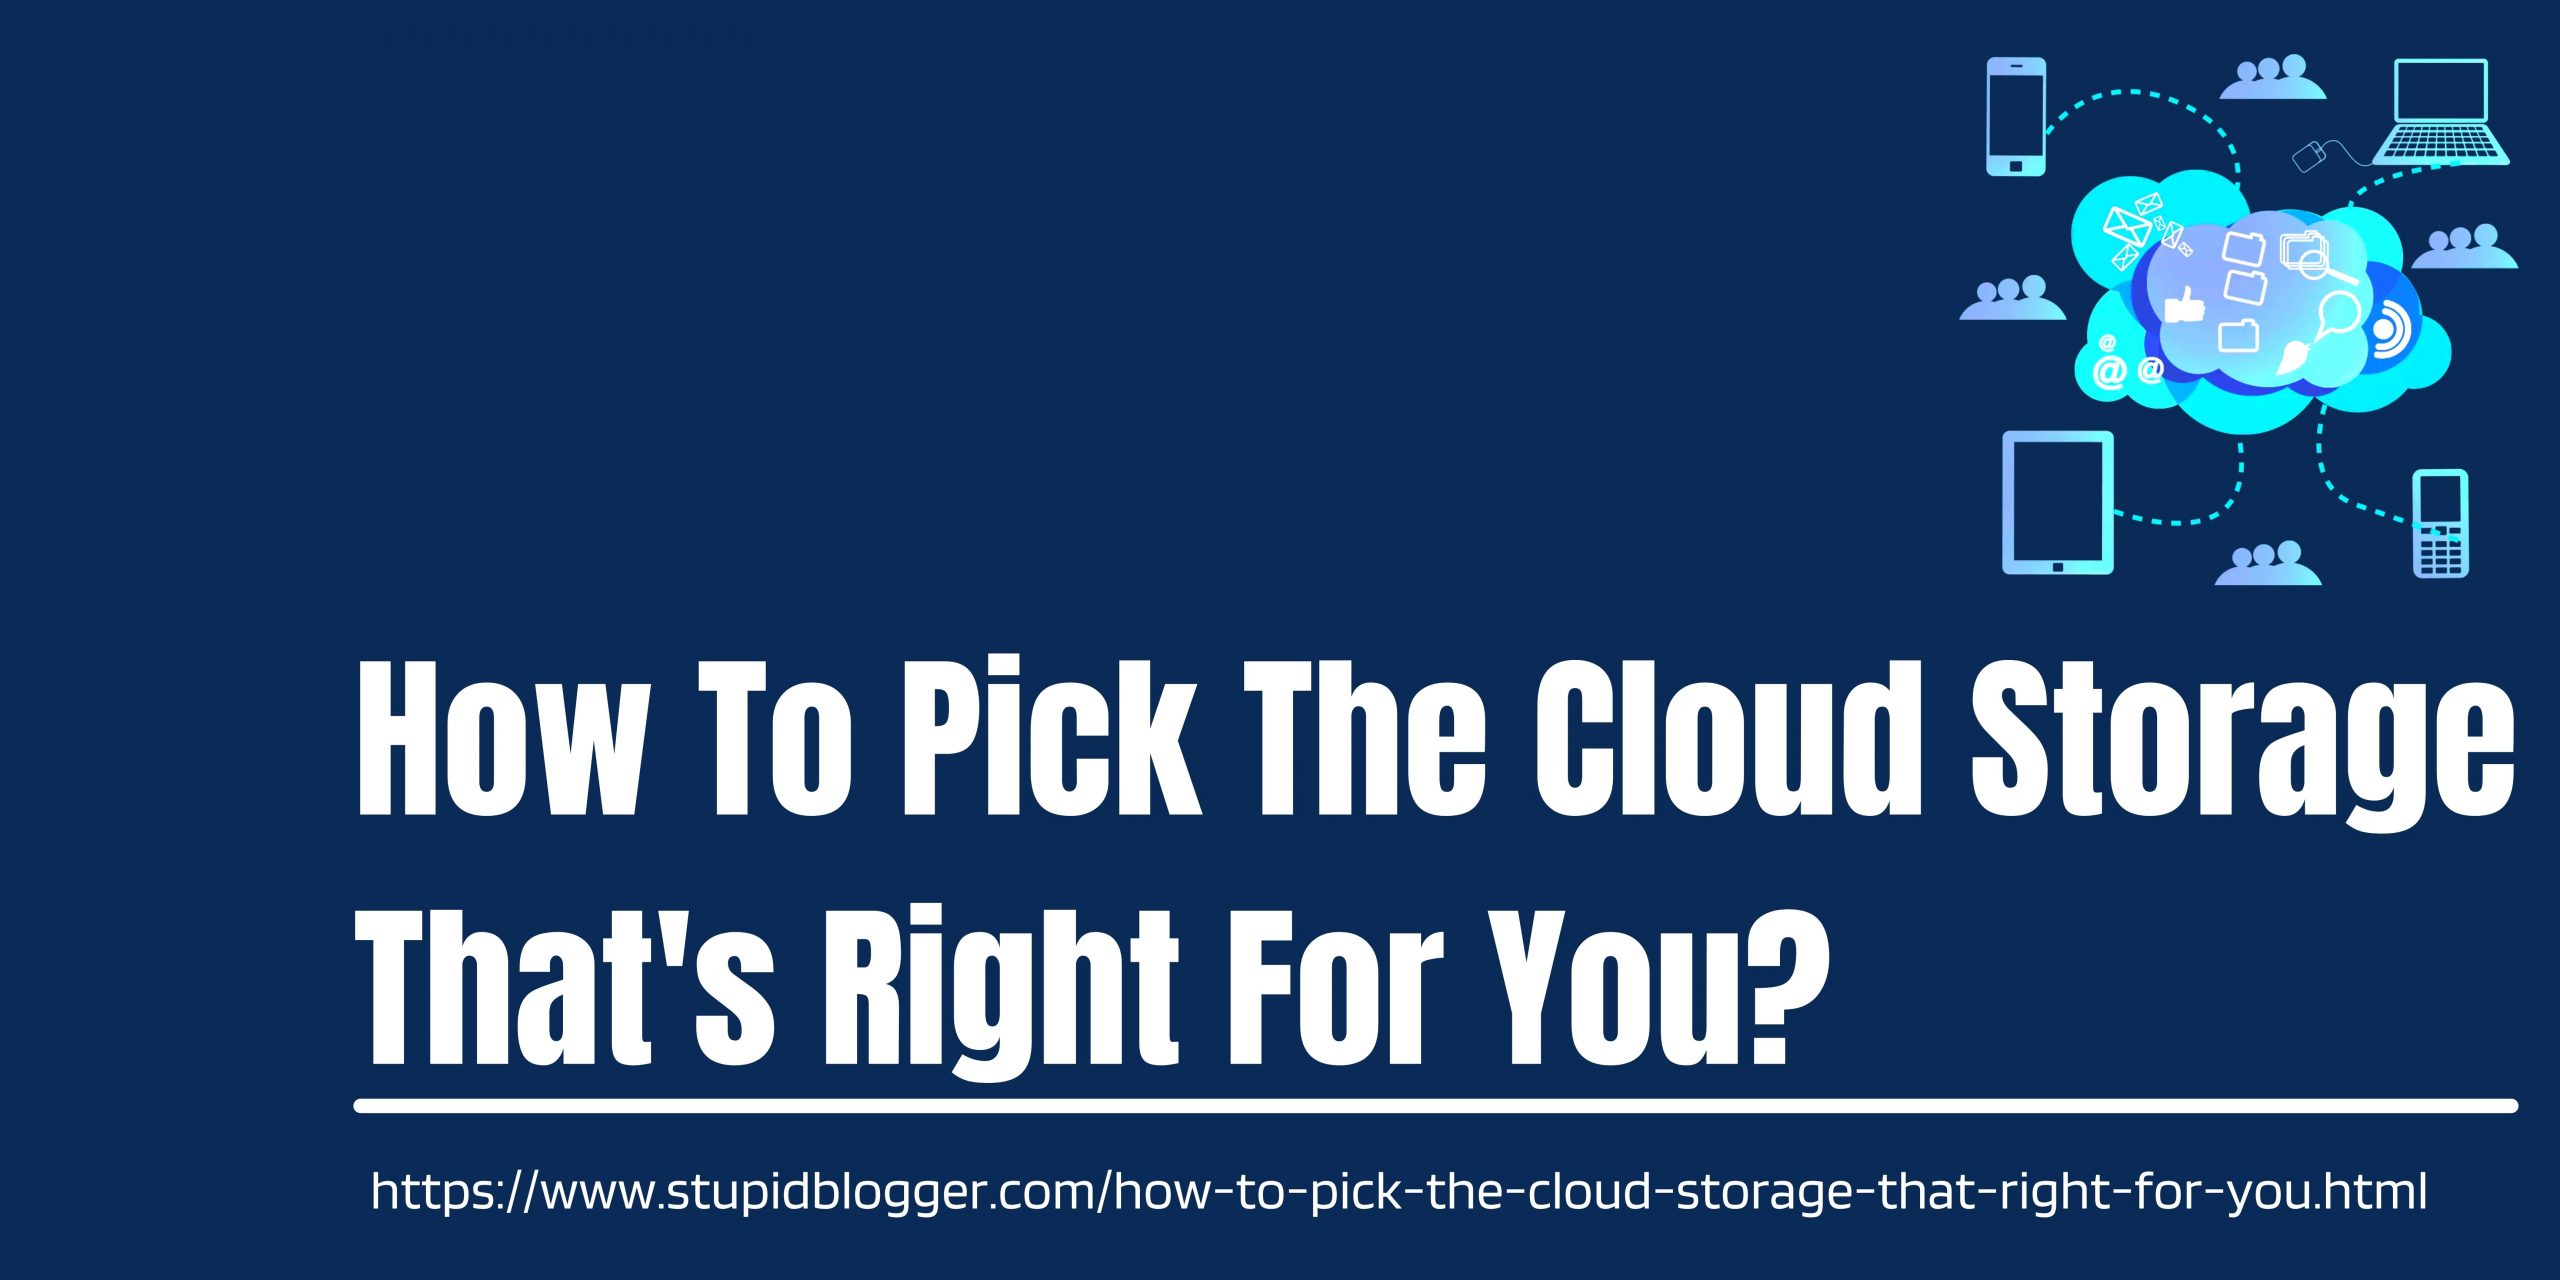 How To Pick The Cloud Storage That's Right For You www.stupidblogger.com